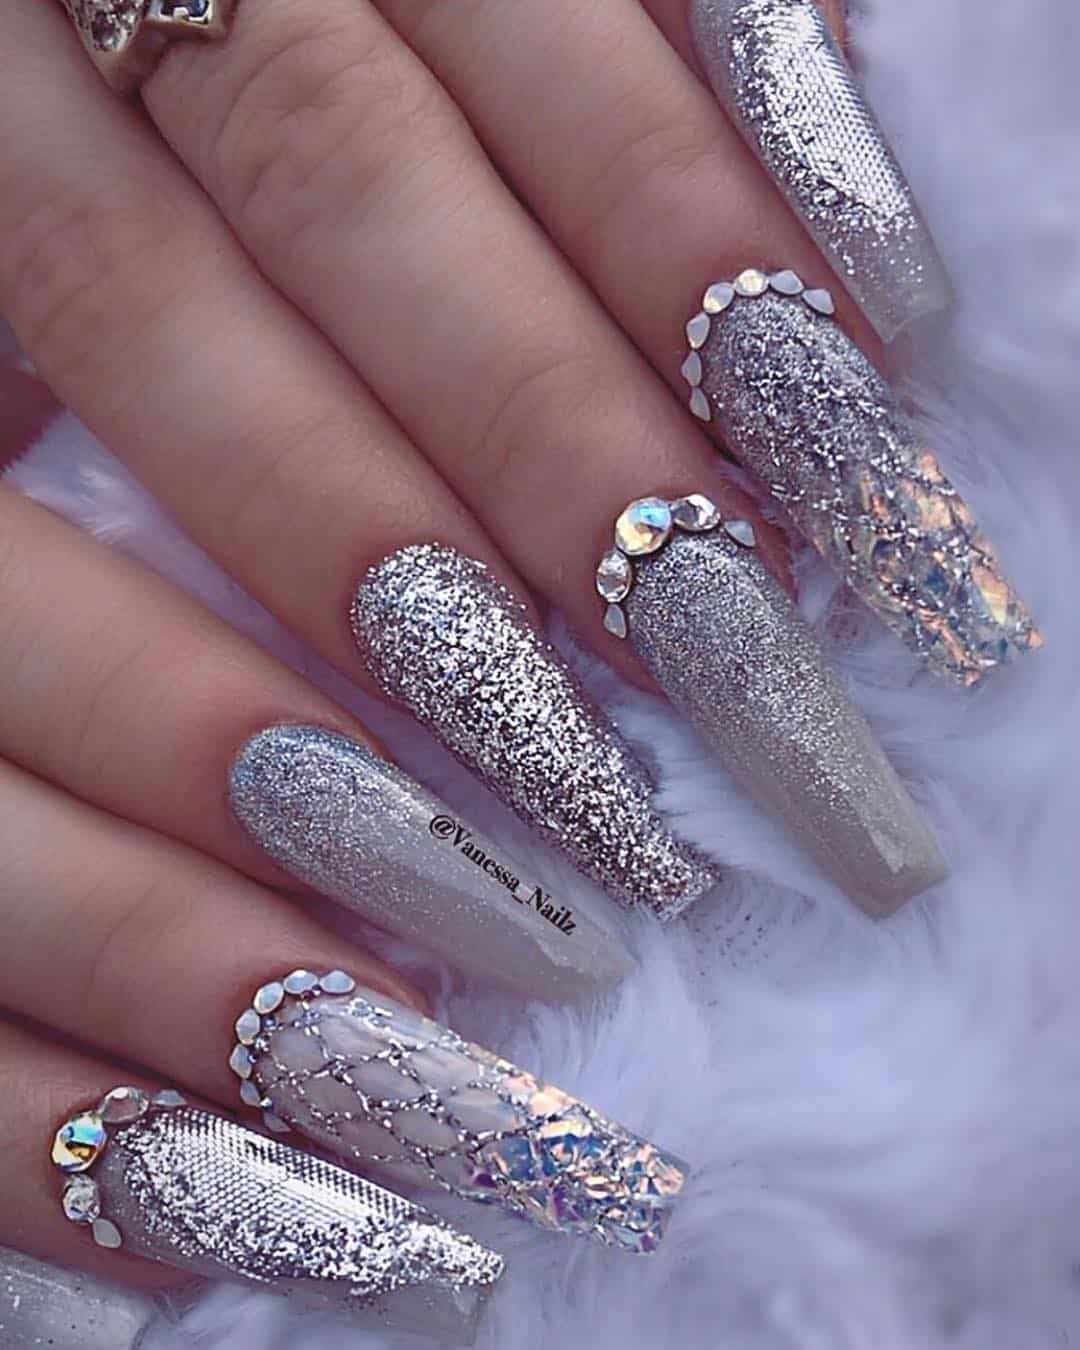 Acrylic Nails with Glitter Accents